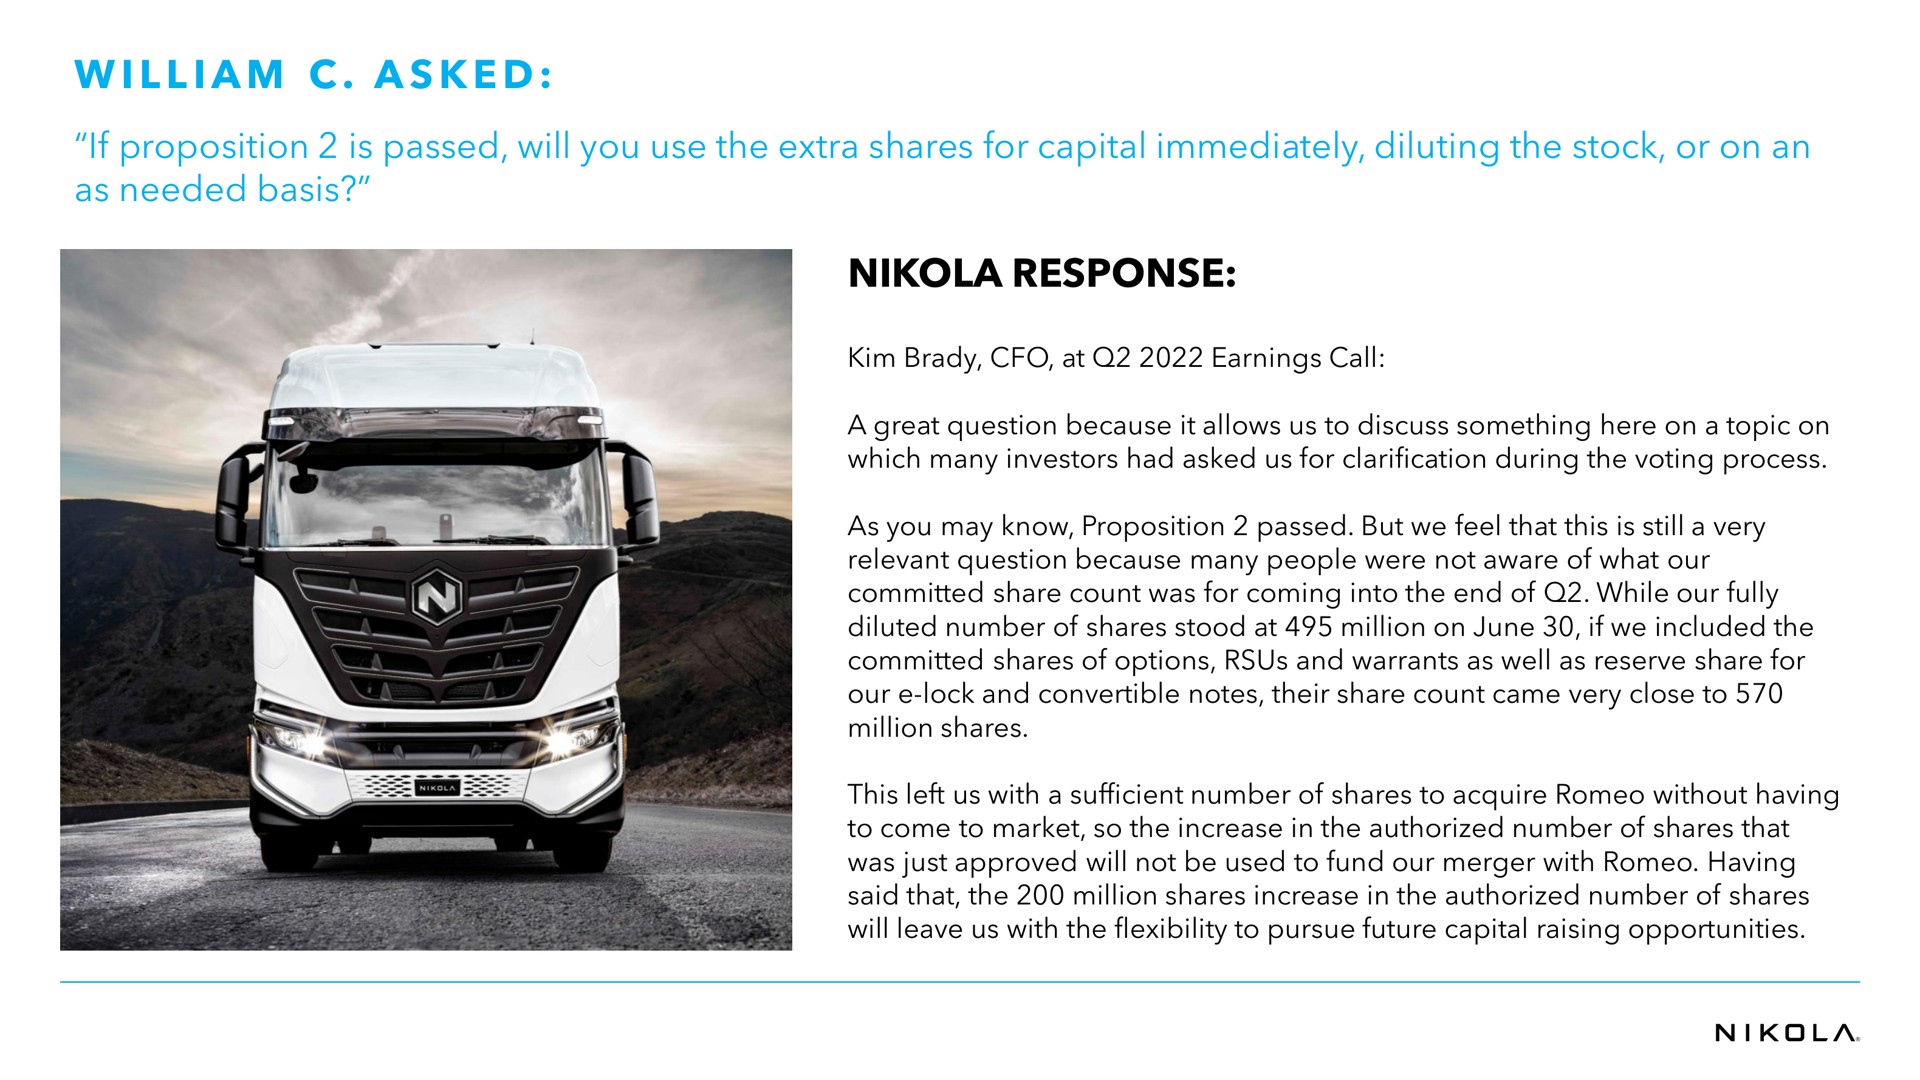 i i a a if proposition is passed will you use the extra shares for capital immediately diluting the stock or on an as needed basis response asked | Nikola